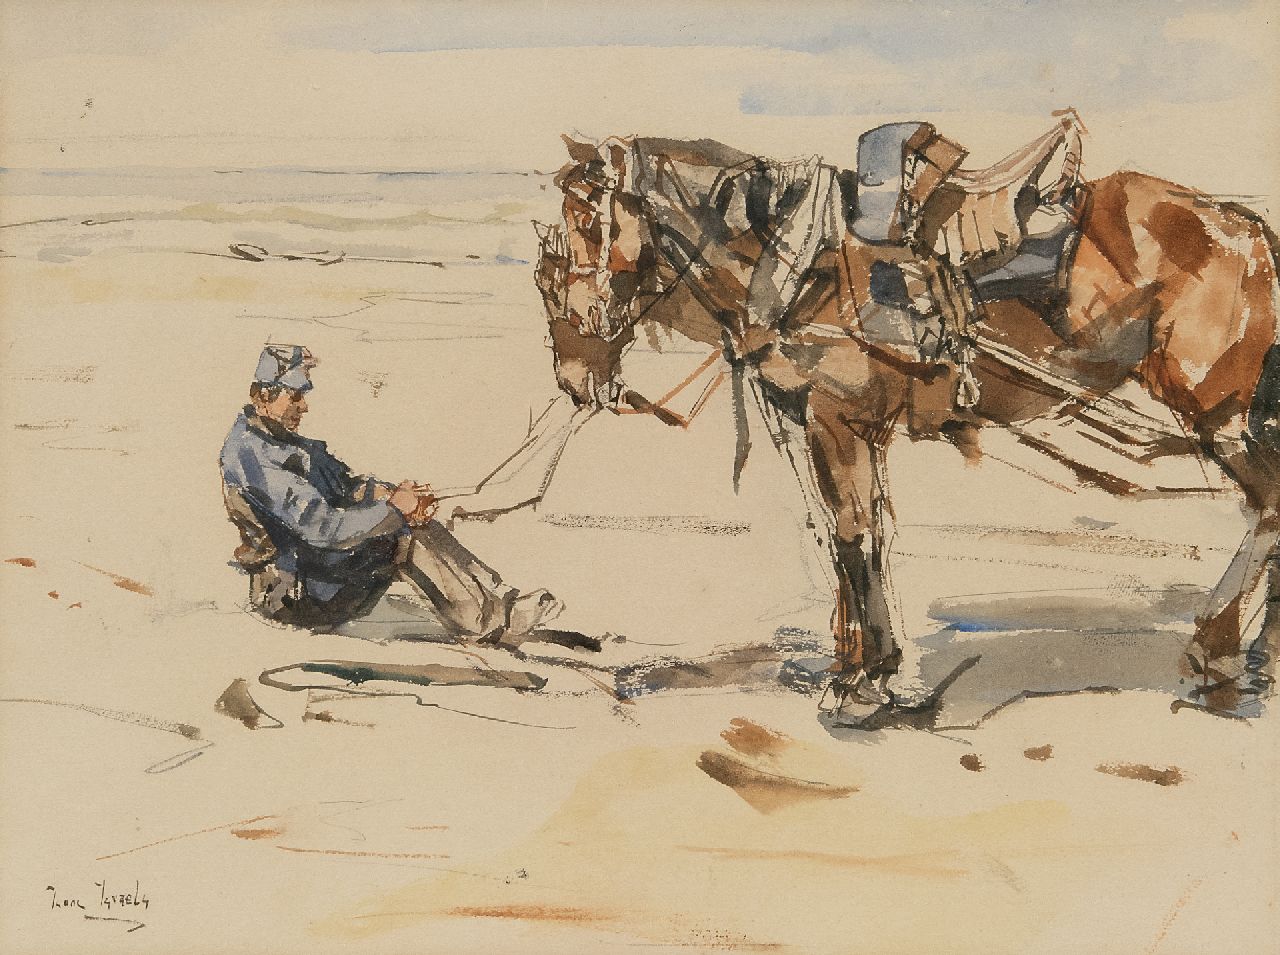 Israels I.L.  | 'Isaac' Lazarus Israels | Watercolours and drawings offered for sale | A gunner on the beach, watercolour on paper 19.4 x 26.0 cm, signed l.l.